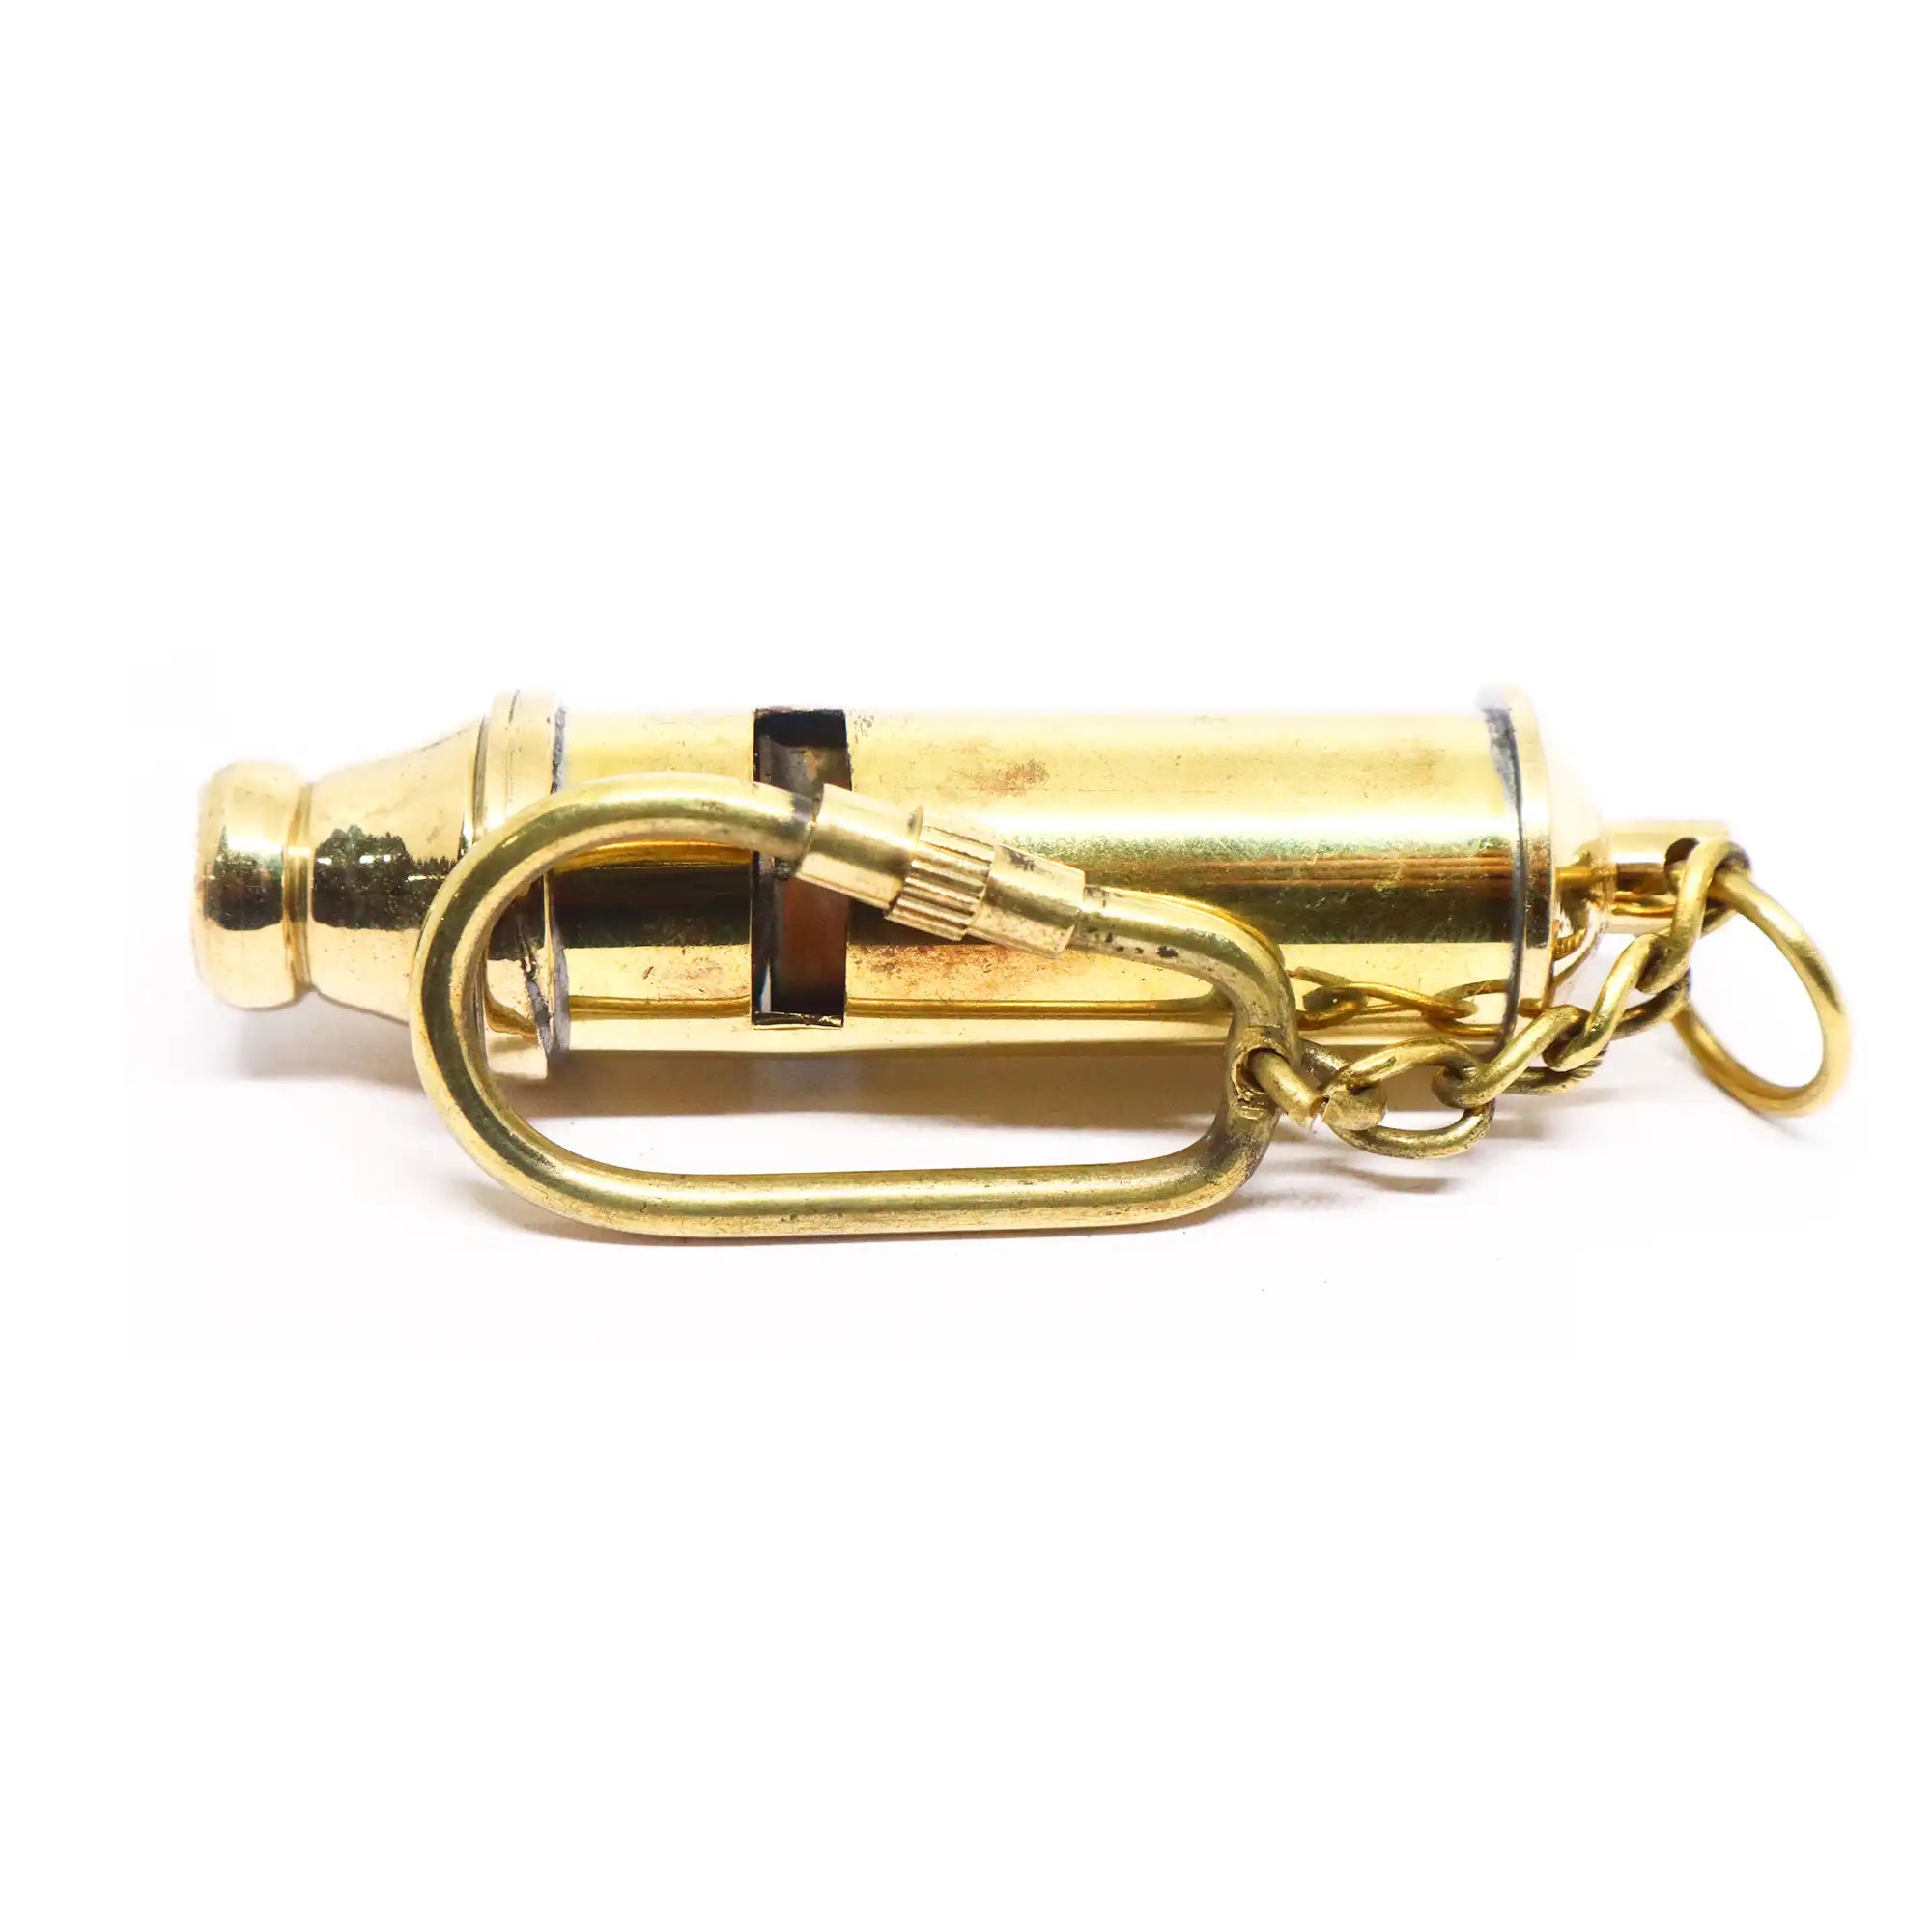 Brass Scout's Whistle Key Ring BSWKR01